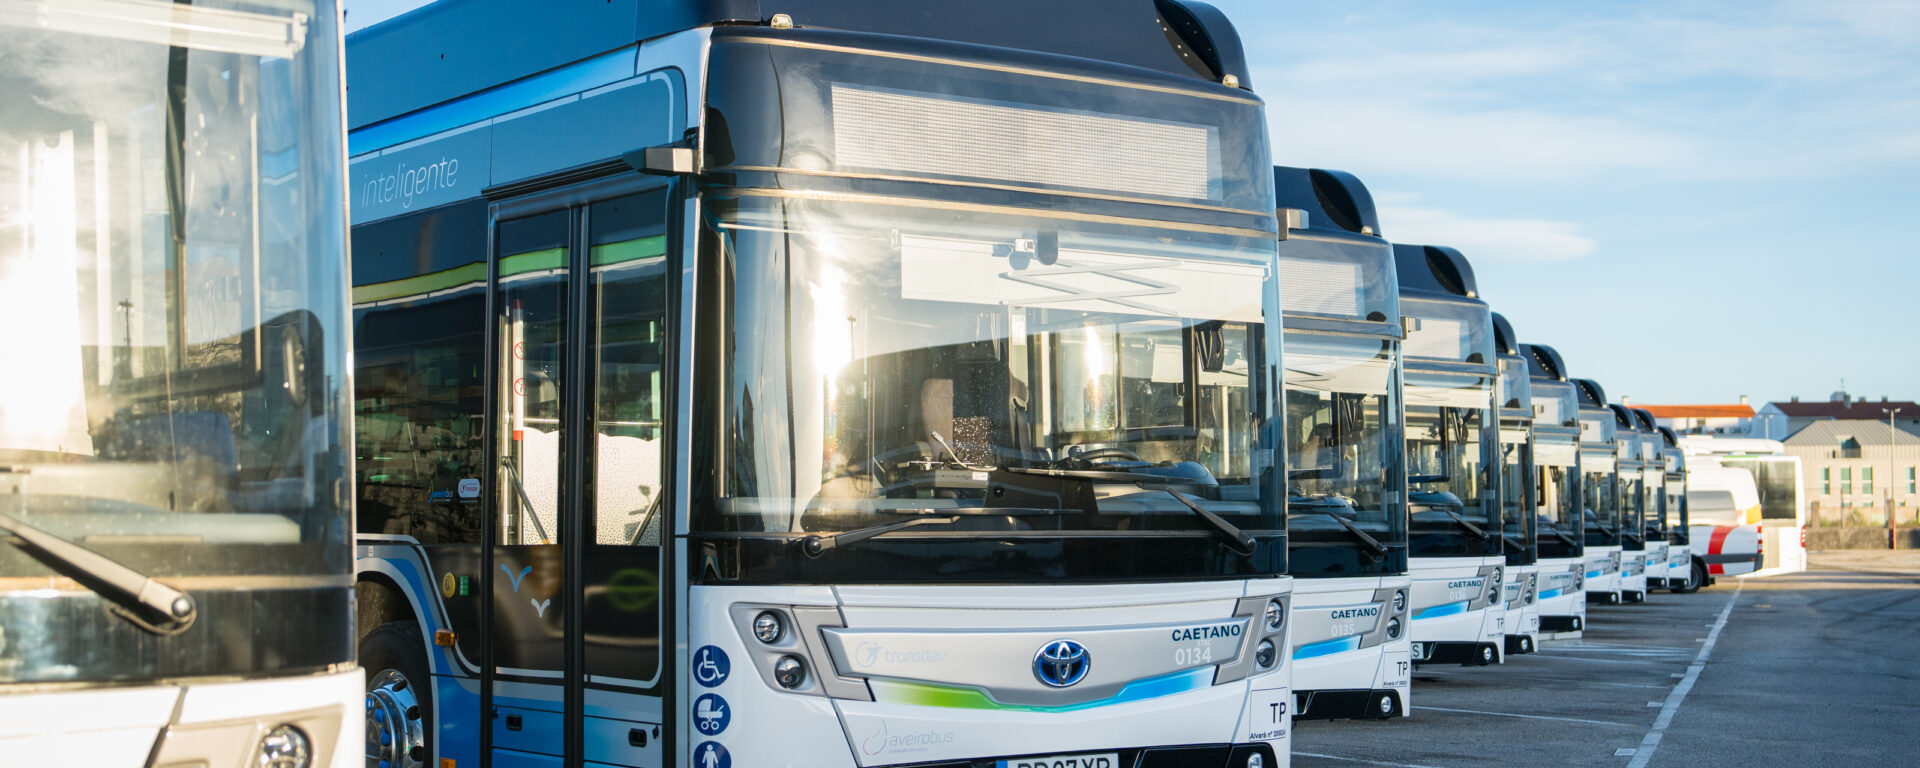 10 more electric buses for Aveirobus